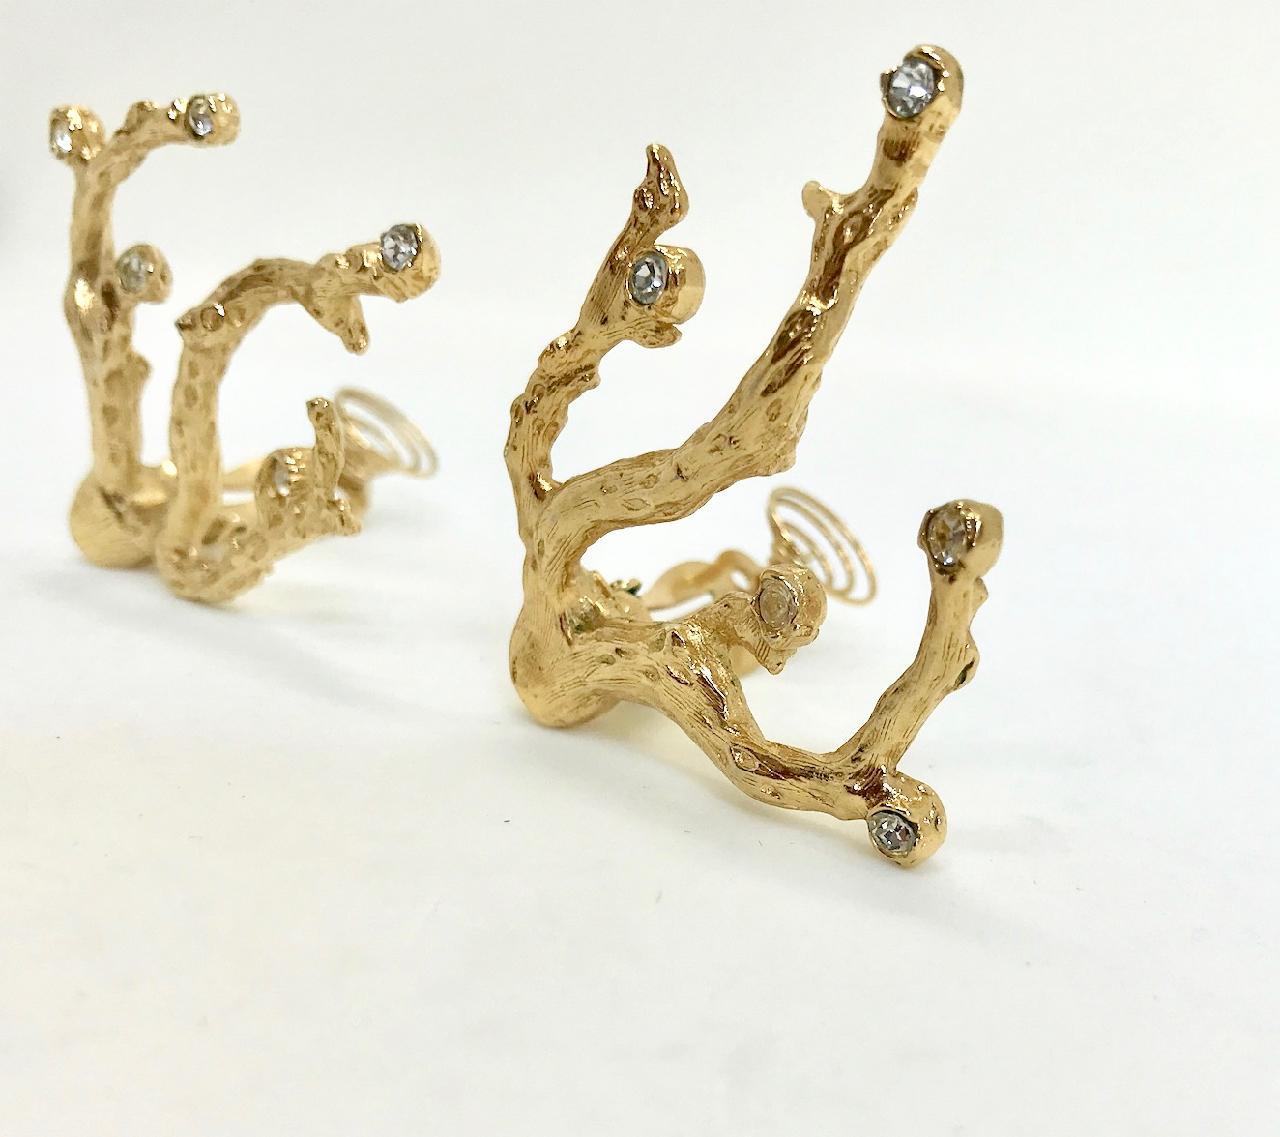 Yves Saint Laurent YSL 1980s Vintage Goosens Coral Gold Plated Earrings. 

Rare, collectable statement earrings created by the late great Monsieur Bijou Robert Goosens, these exquisite earrings with the classic Goosens organic form are inspired by